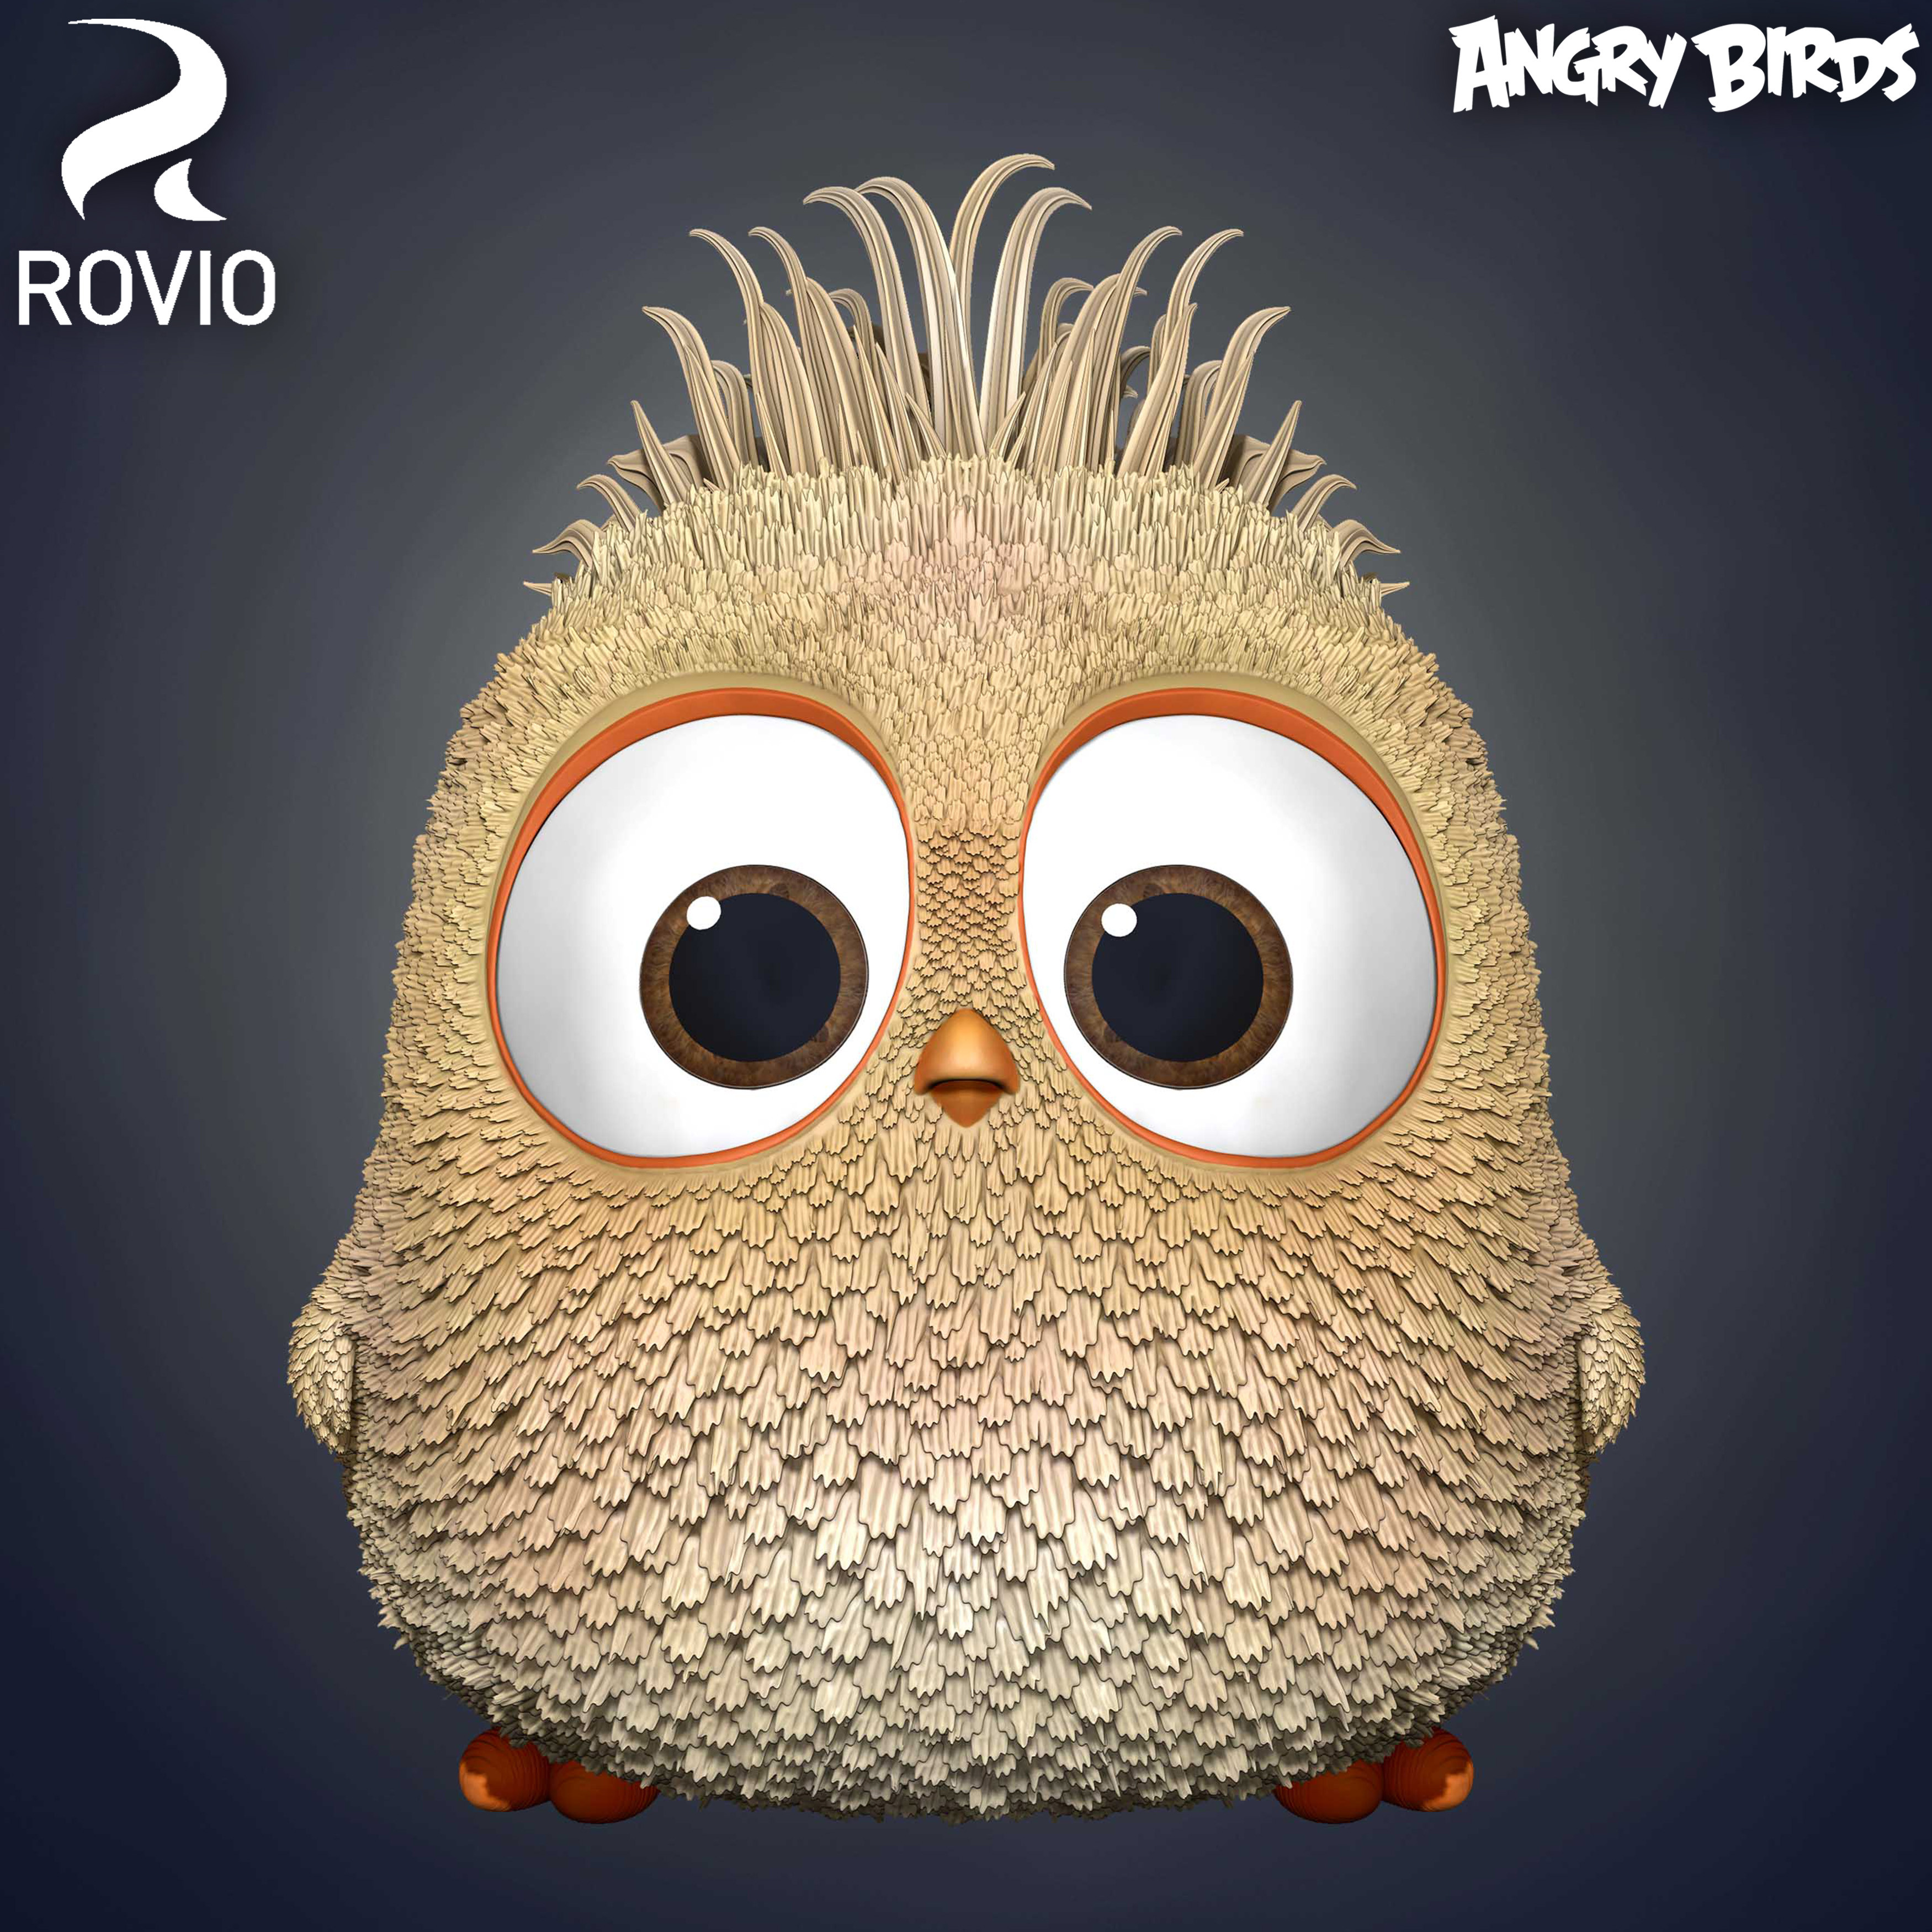 Hatchlings Angry Birds Rovio Entertainment sculpted By Yacine BRINIS 001